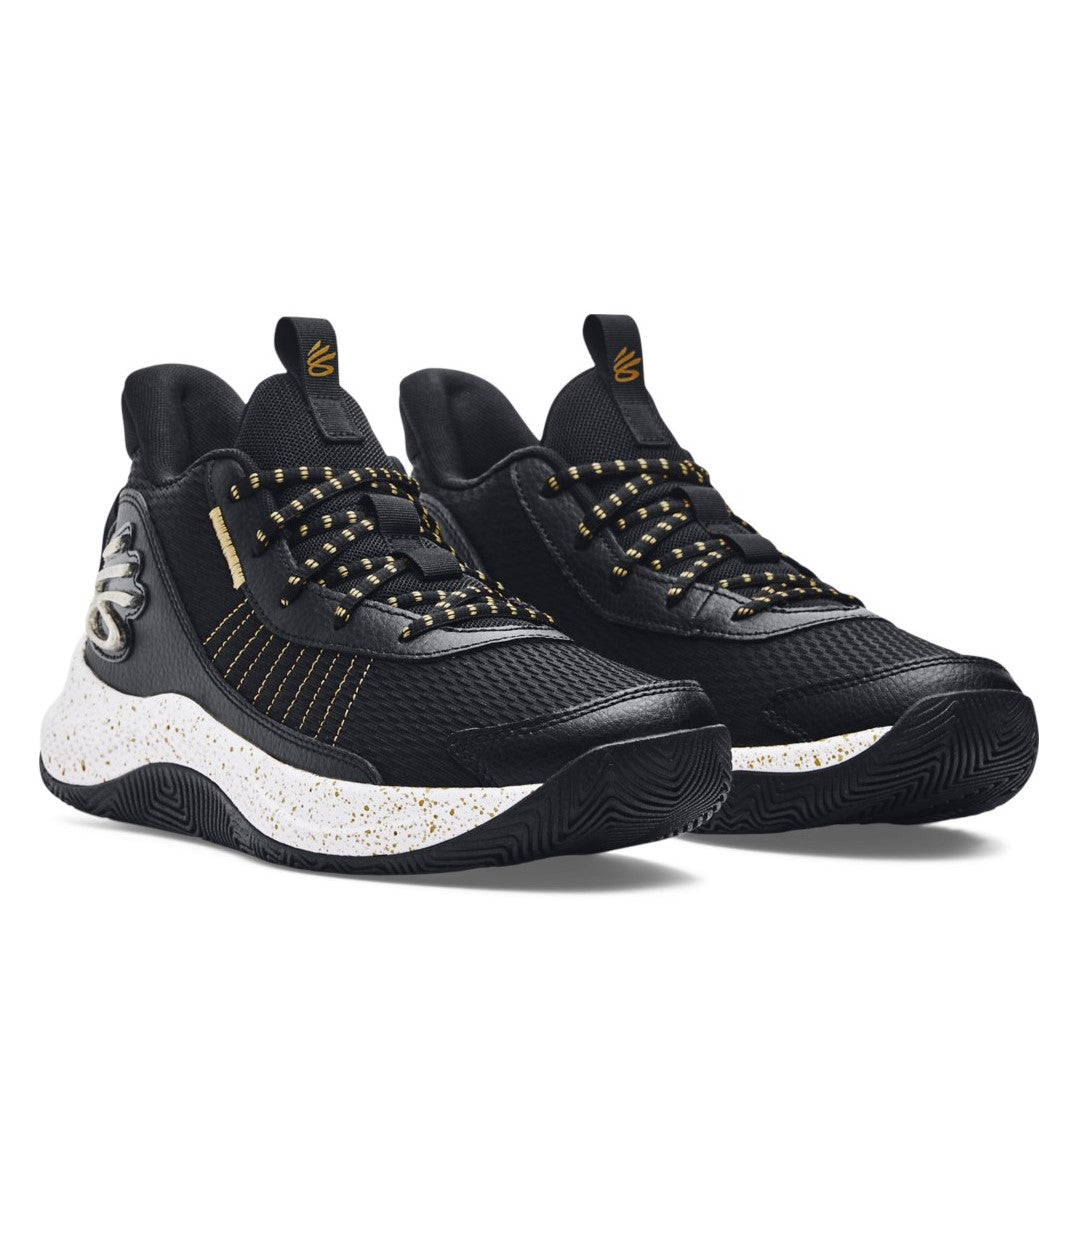 Under Armour Unisex Curry 3Z7 Basketball Shoes Black